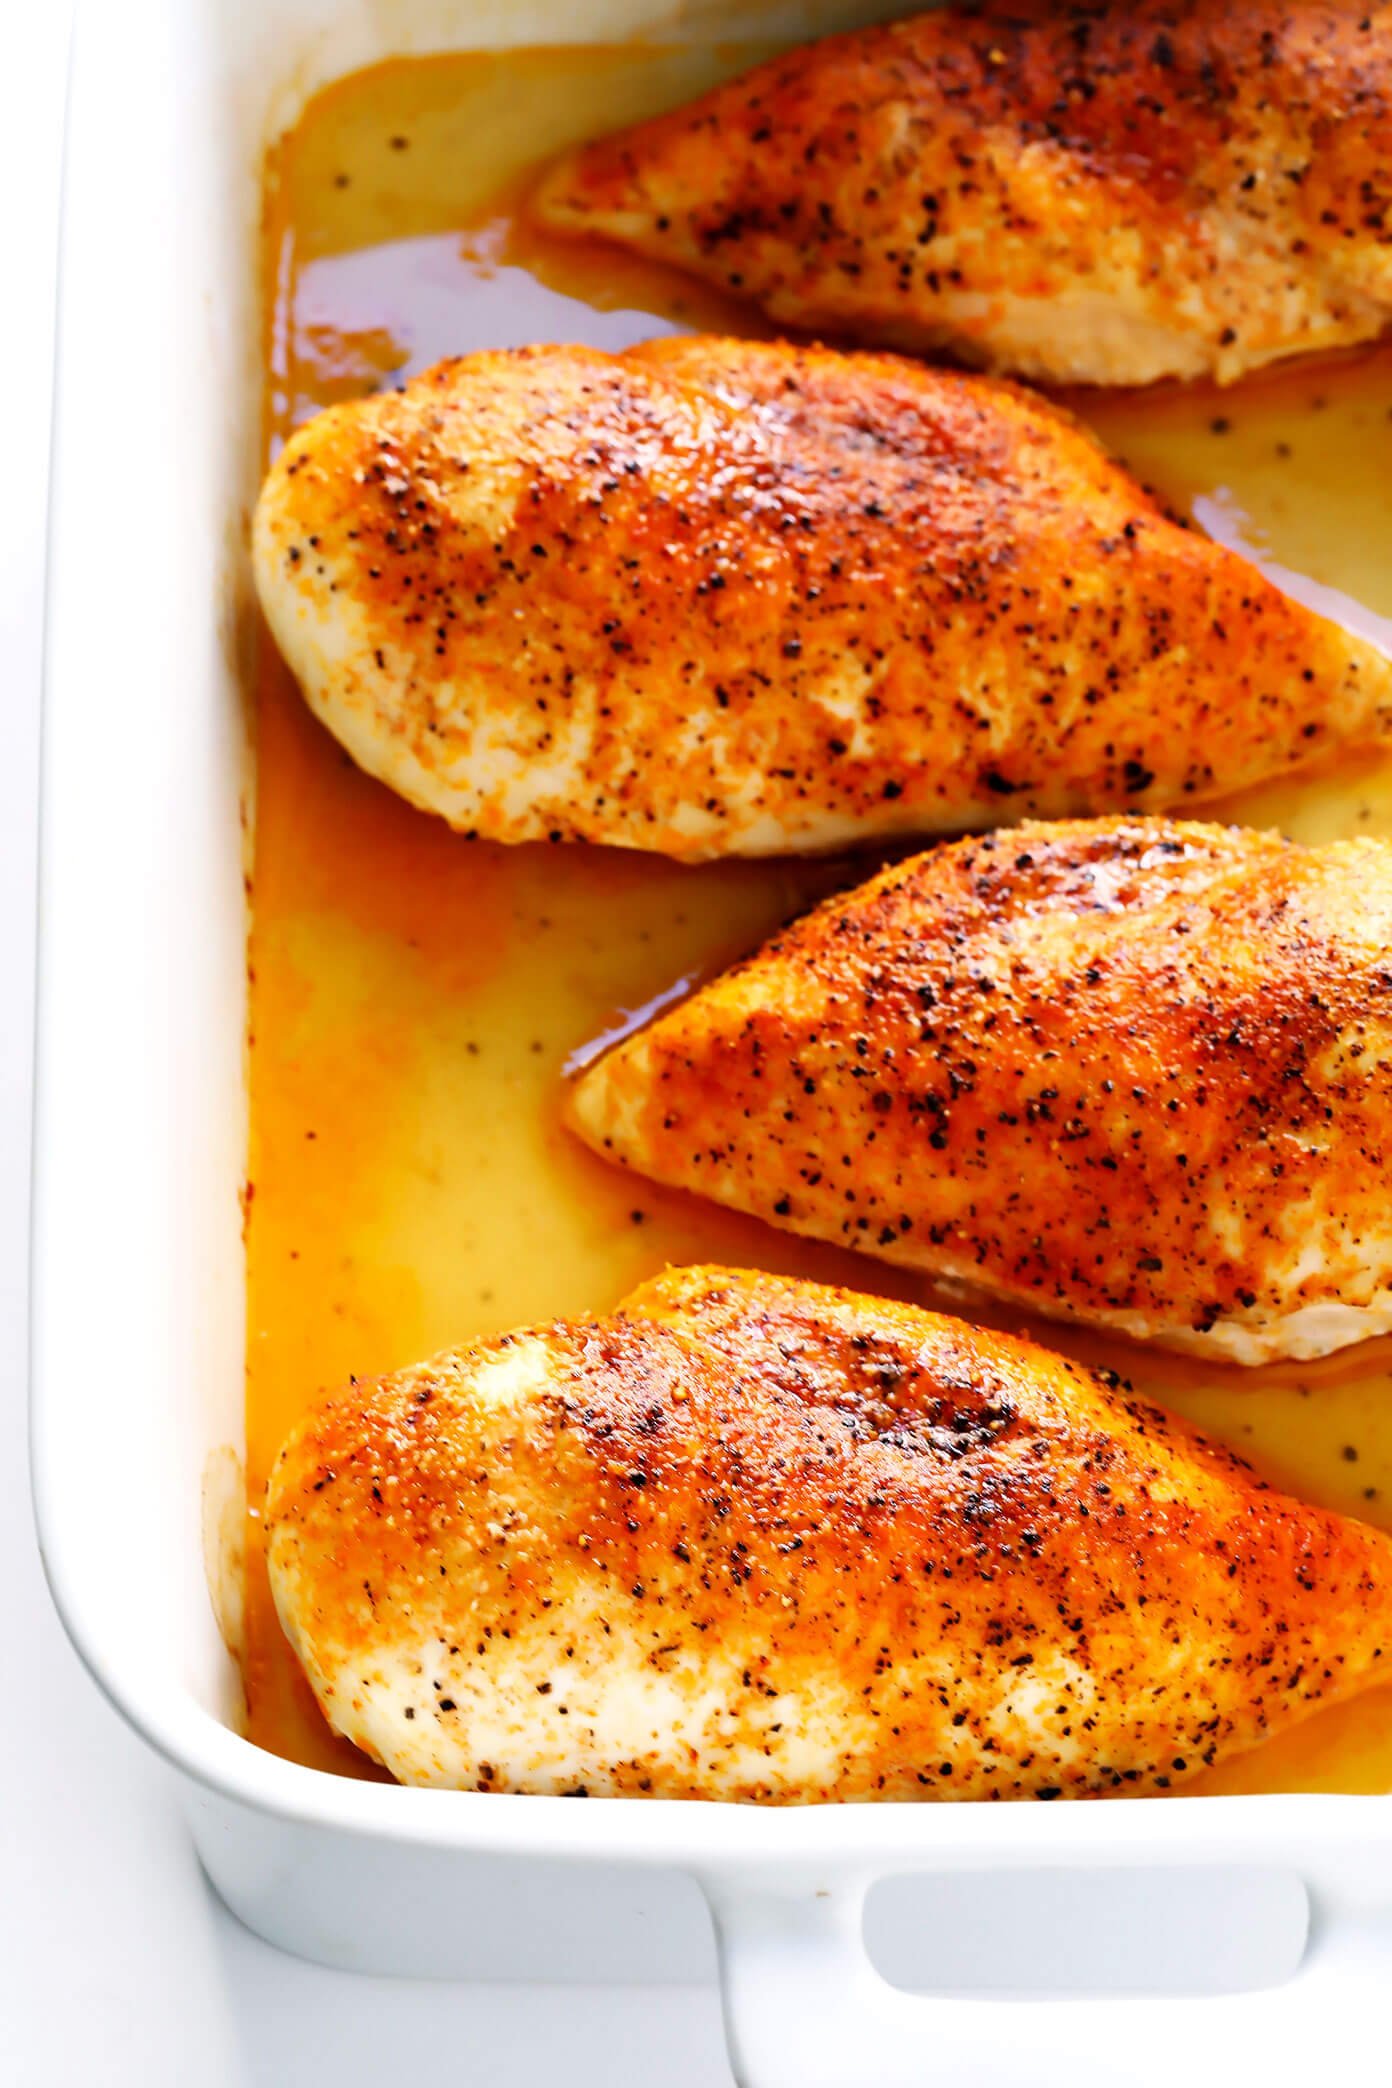 Baked Chicken Breast Gimme Some Oven,How To Make Laminate Wood Floors Shine